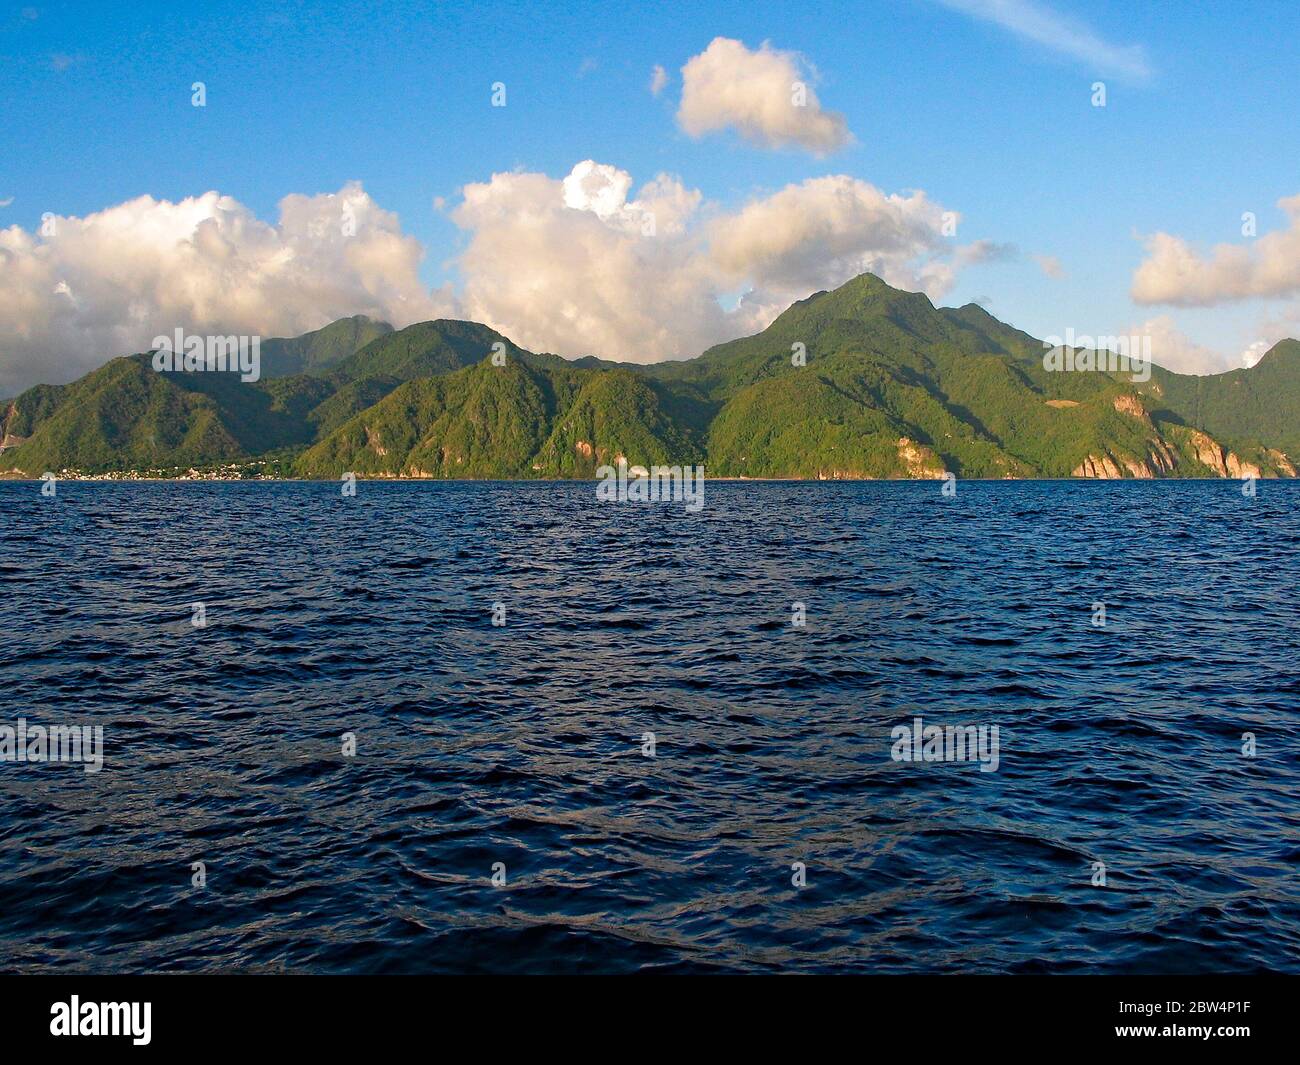 Shores of a Caribbean island, view from the deck, Martinique, the Lesser Antilles, France. Stock Photo